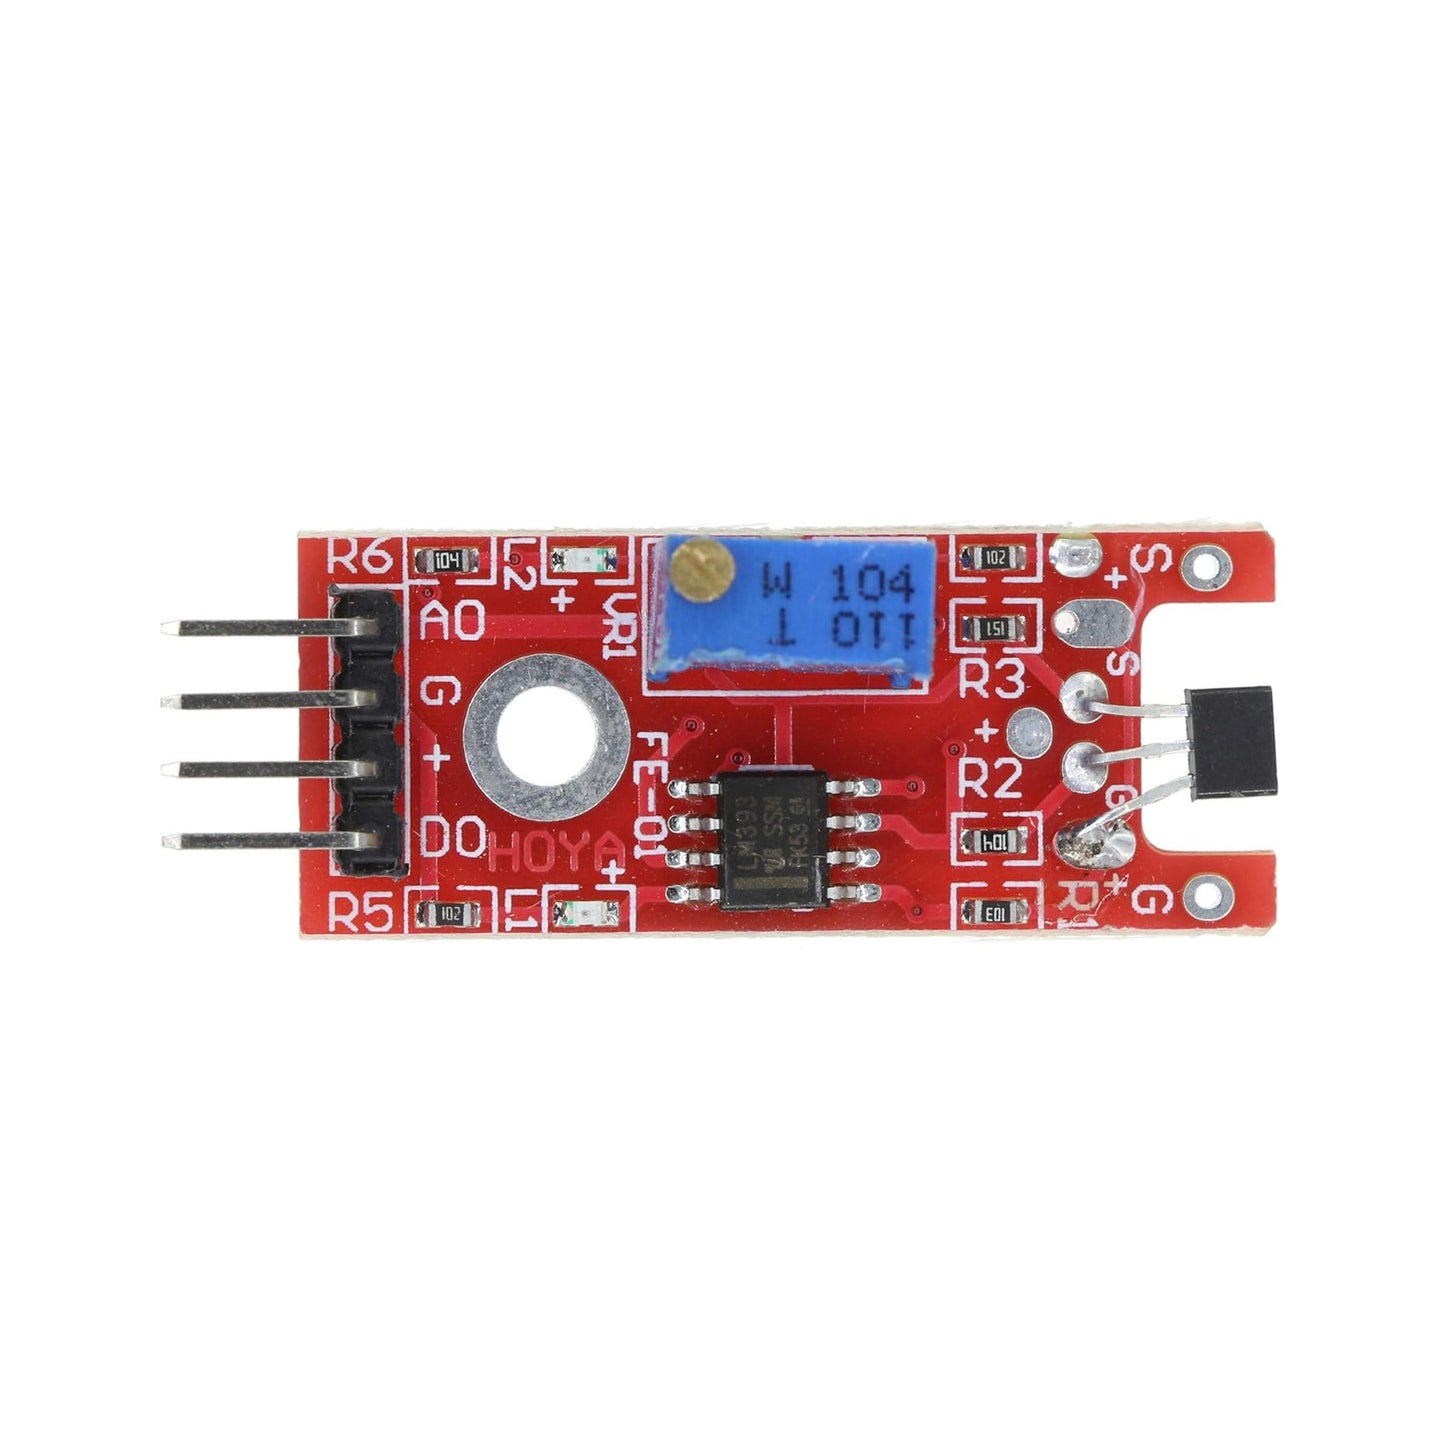 Linear Magnetic Hall Effect Sensor Module Hall Effect Switch Speed Counting Sensor Module compatible with Arduino, Raspberry Pi, ESP8266 Boards - AB008 - REES52